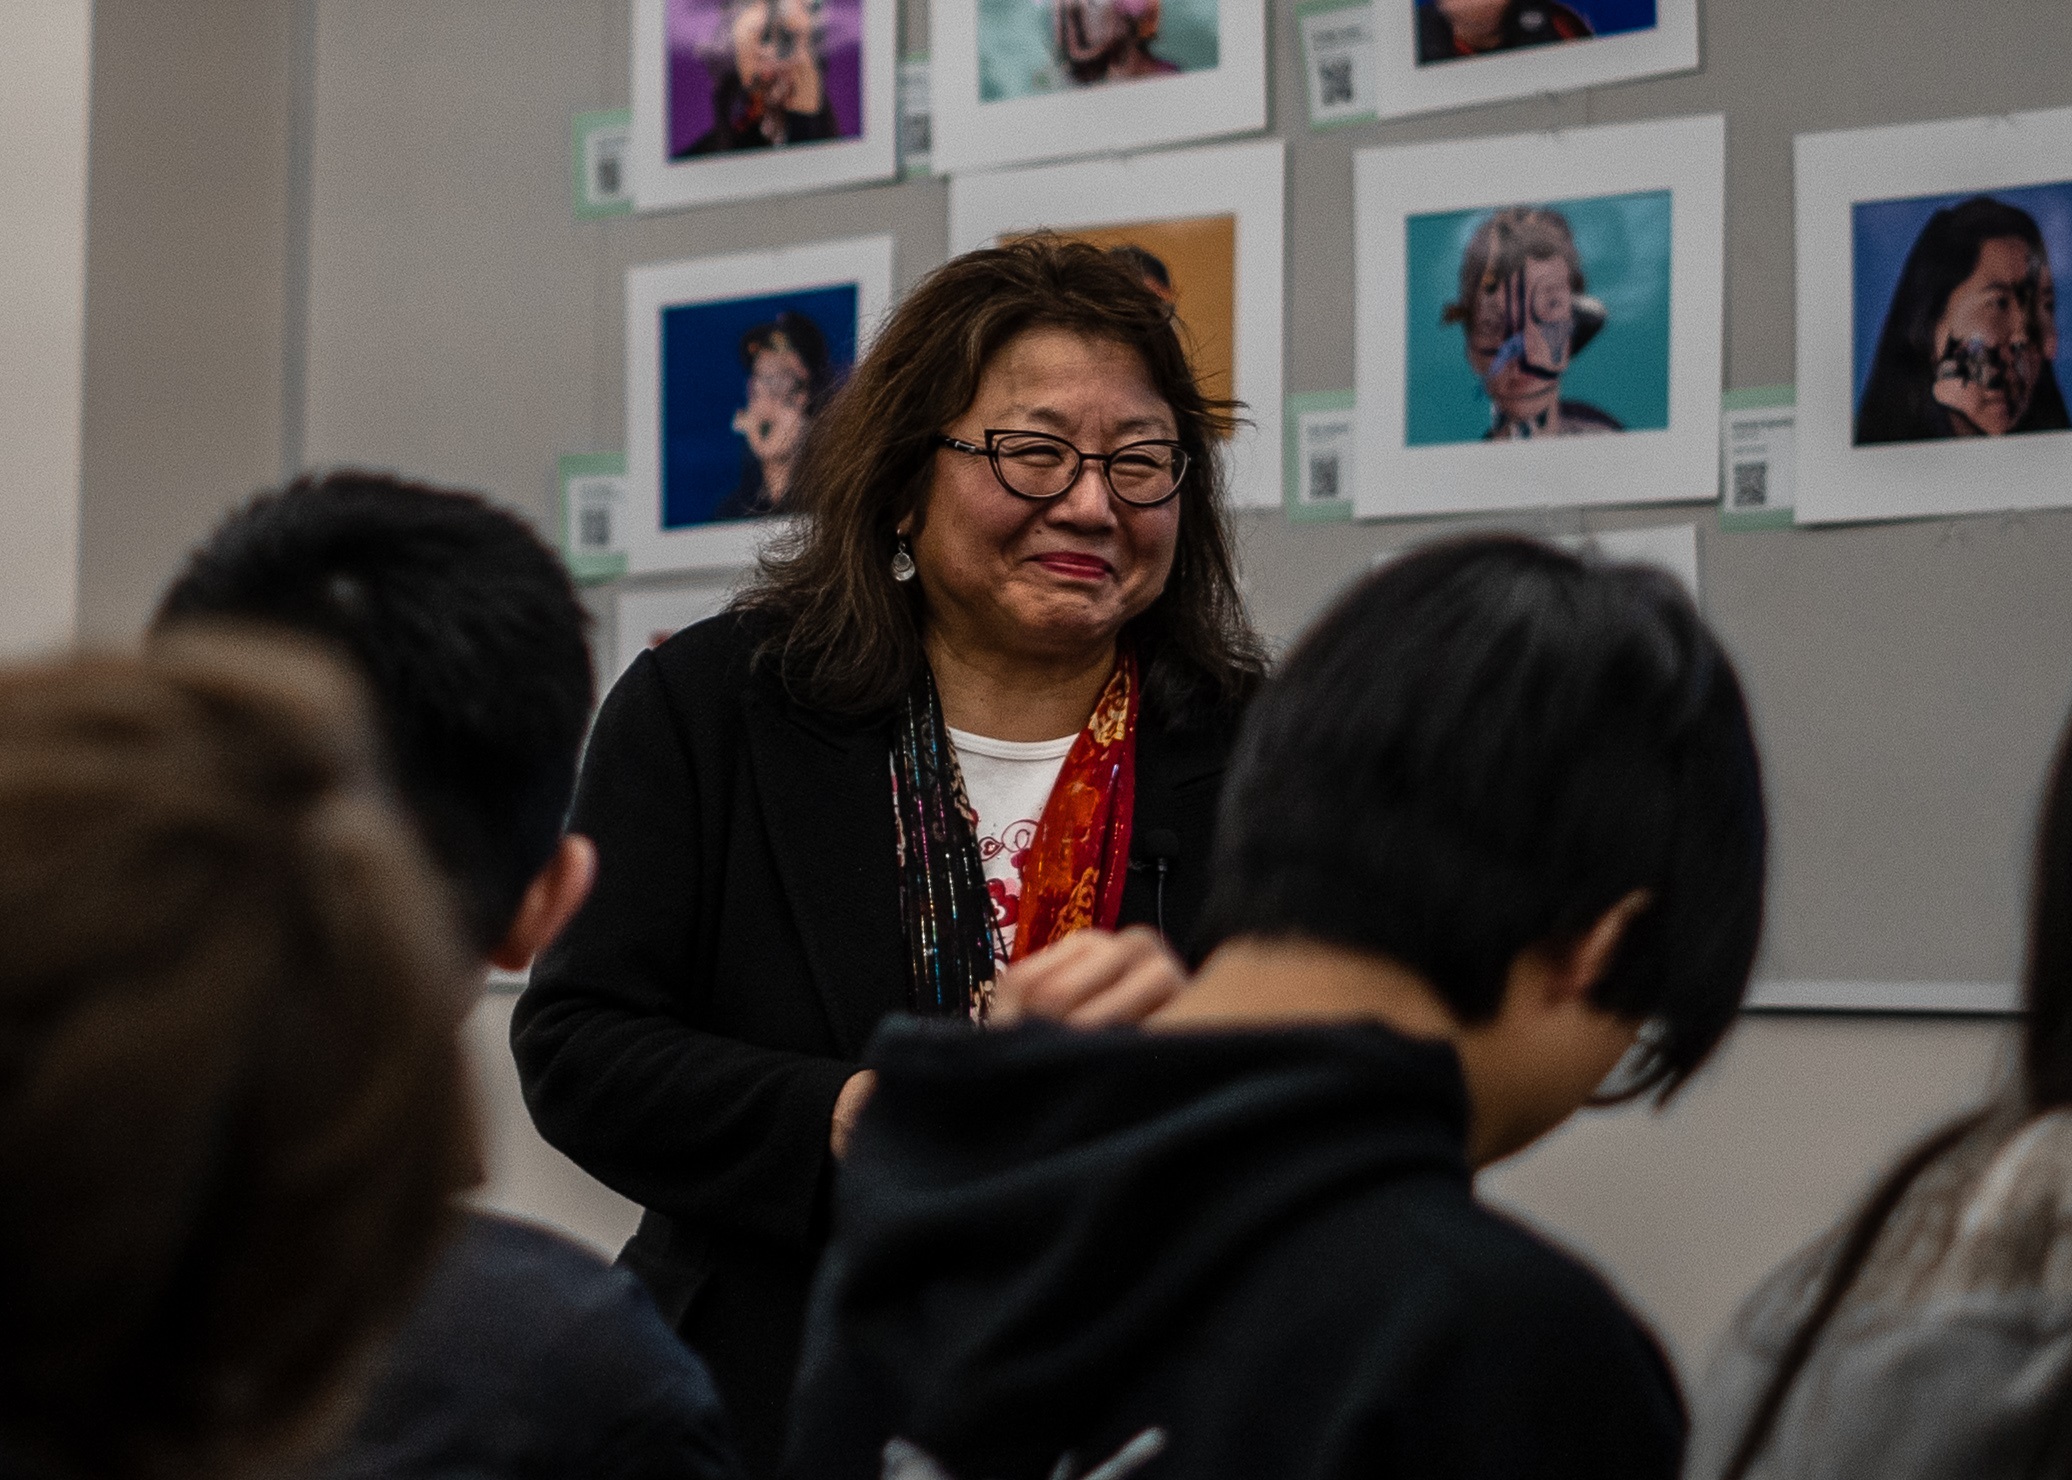 Nagae spoke to Aragon students about her experiences and about civil rights activist Minoru Yasui.